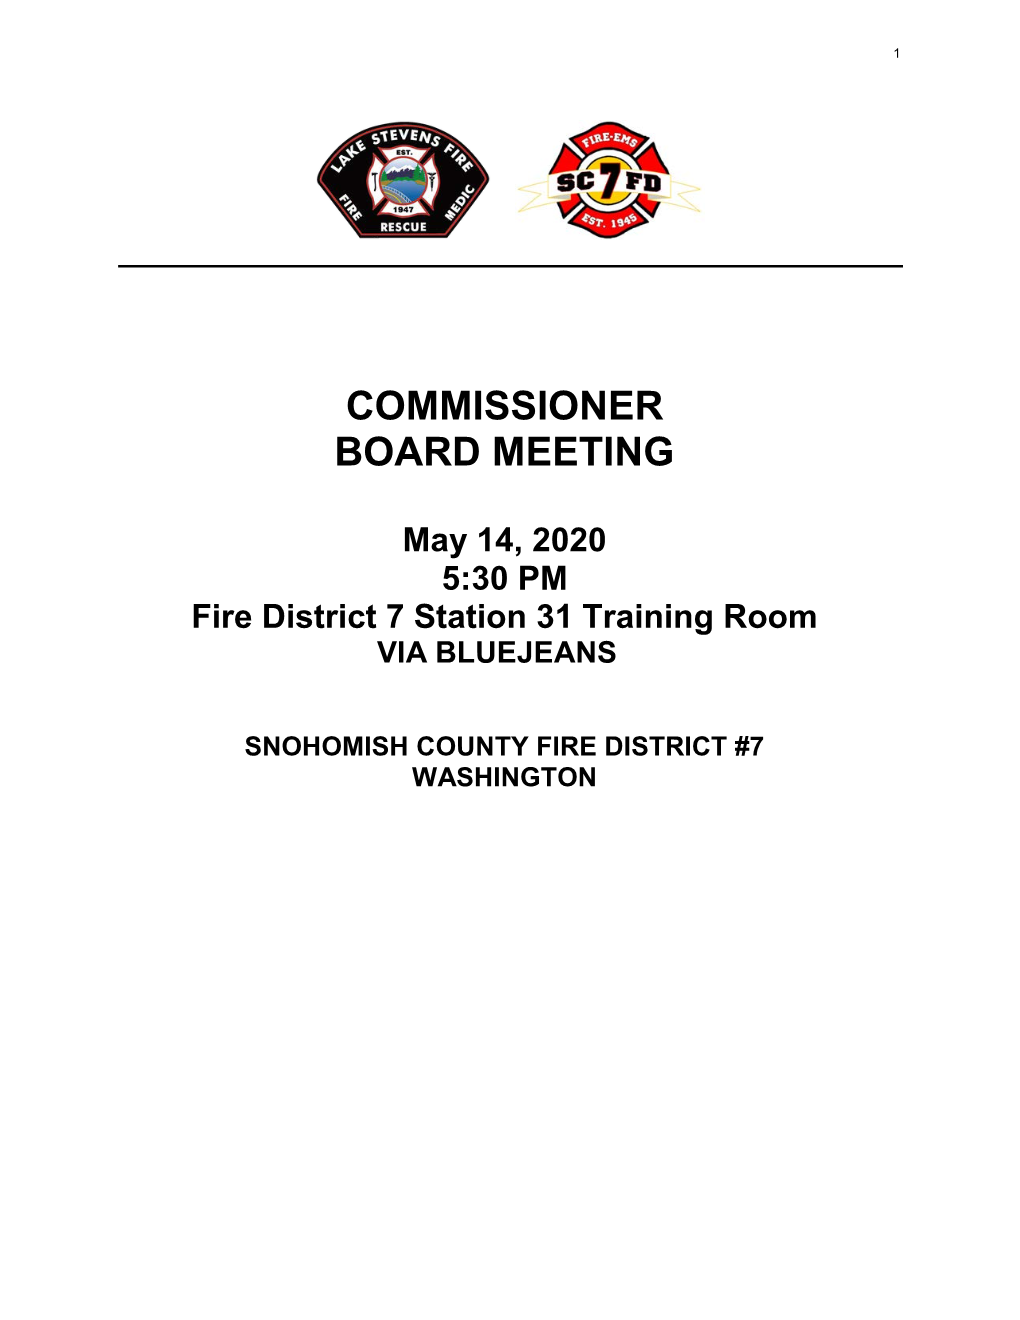 Commissioner Board Meeting